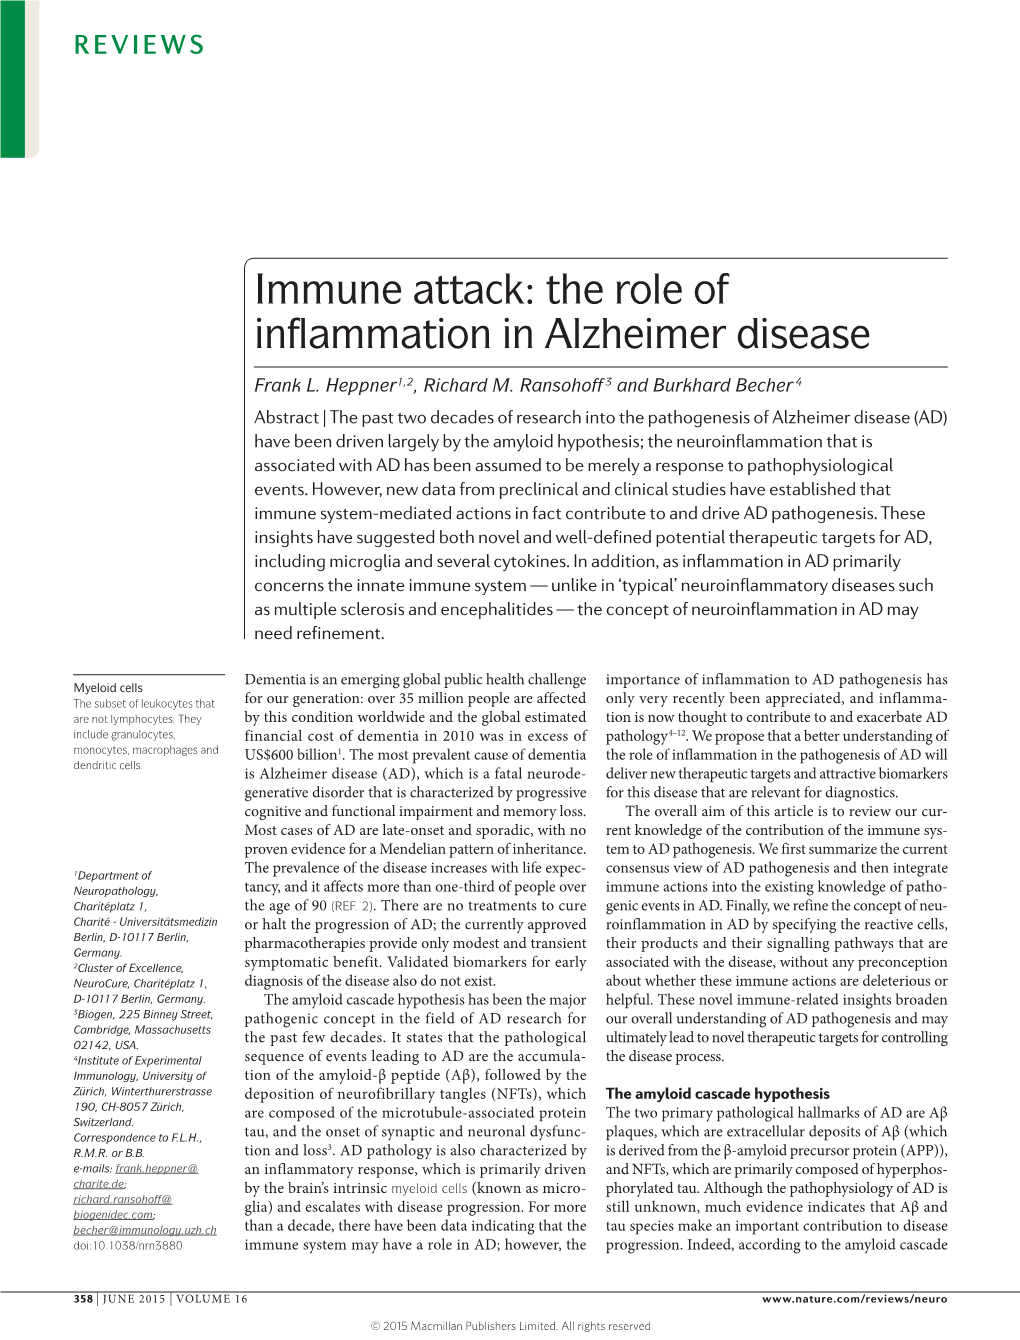 The Role of Inflammation in Alzheimer Disease